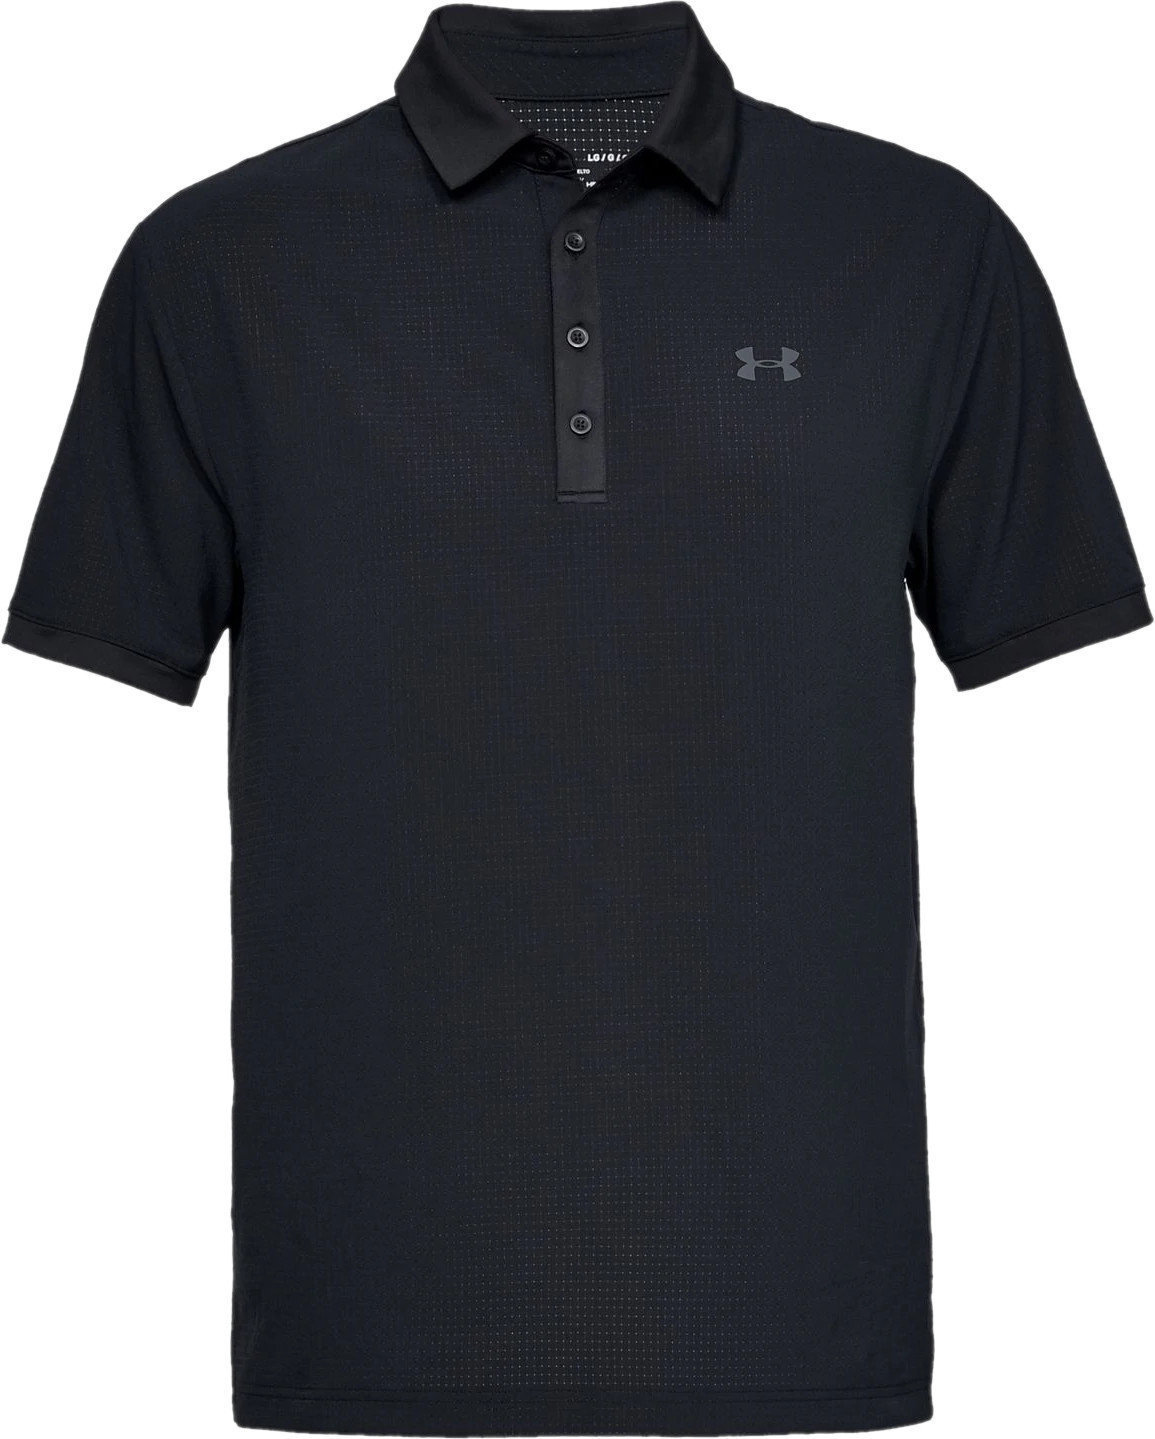 Polo Shirt Under Armour Playoff Vented Black M